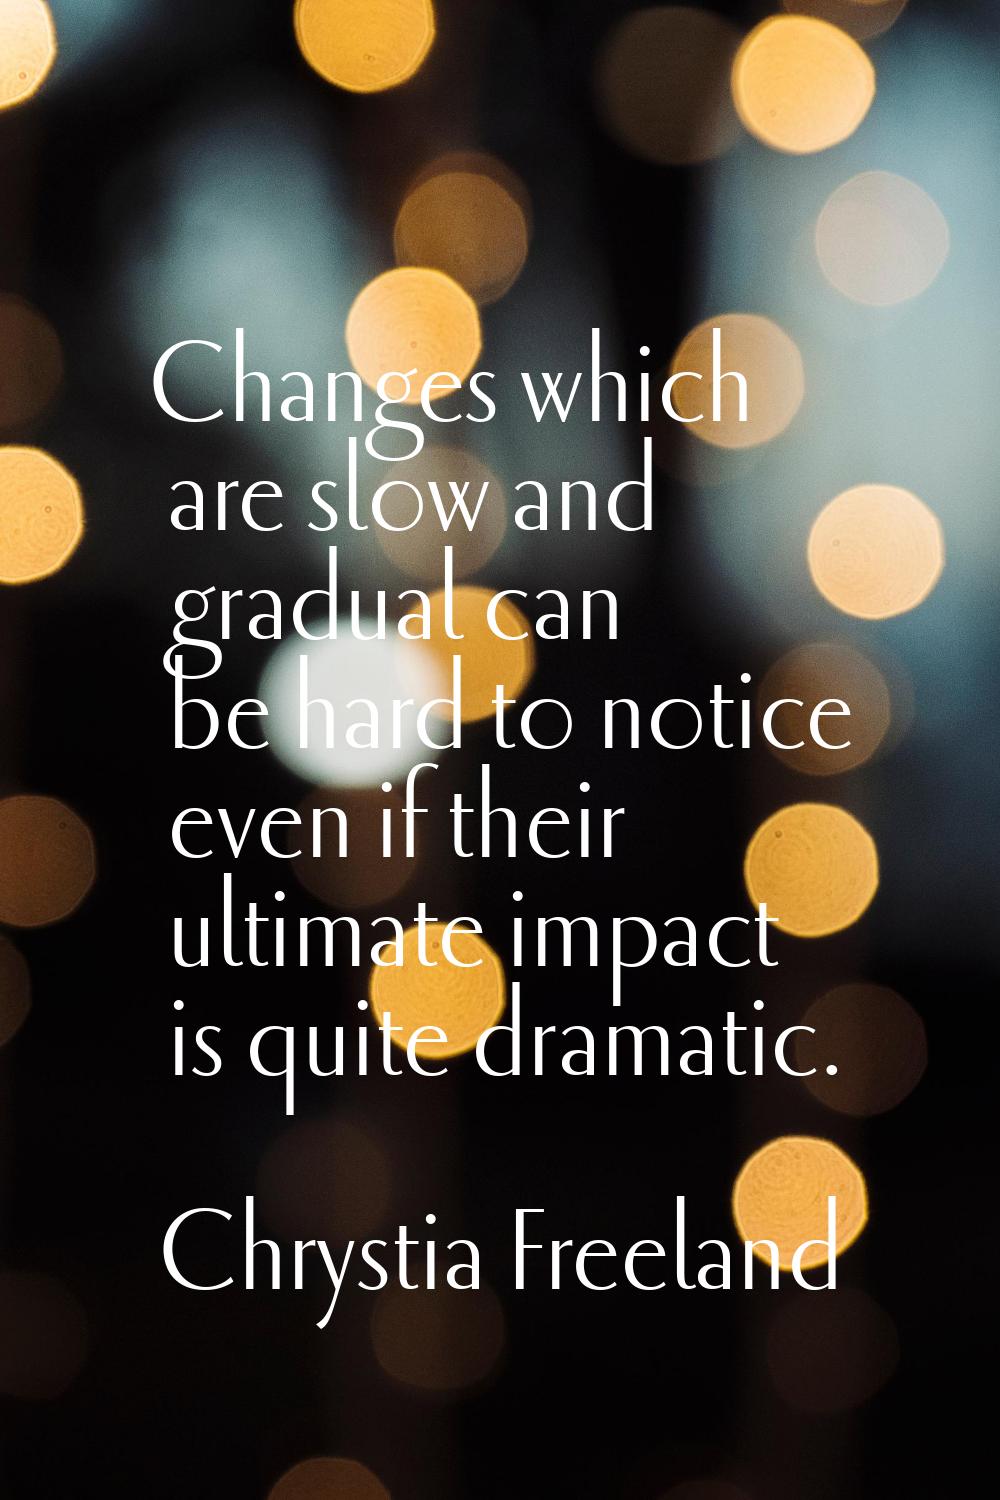 Changes which are slow and gradual can be hard to notice even if their ultimate impact is quite dra